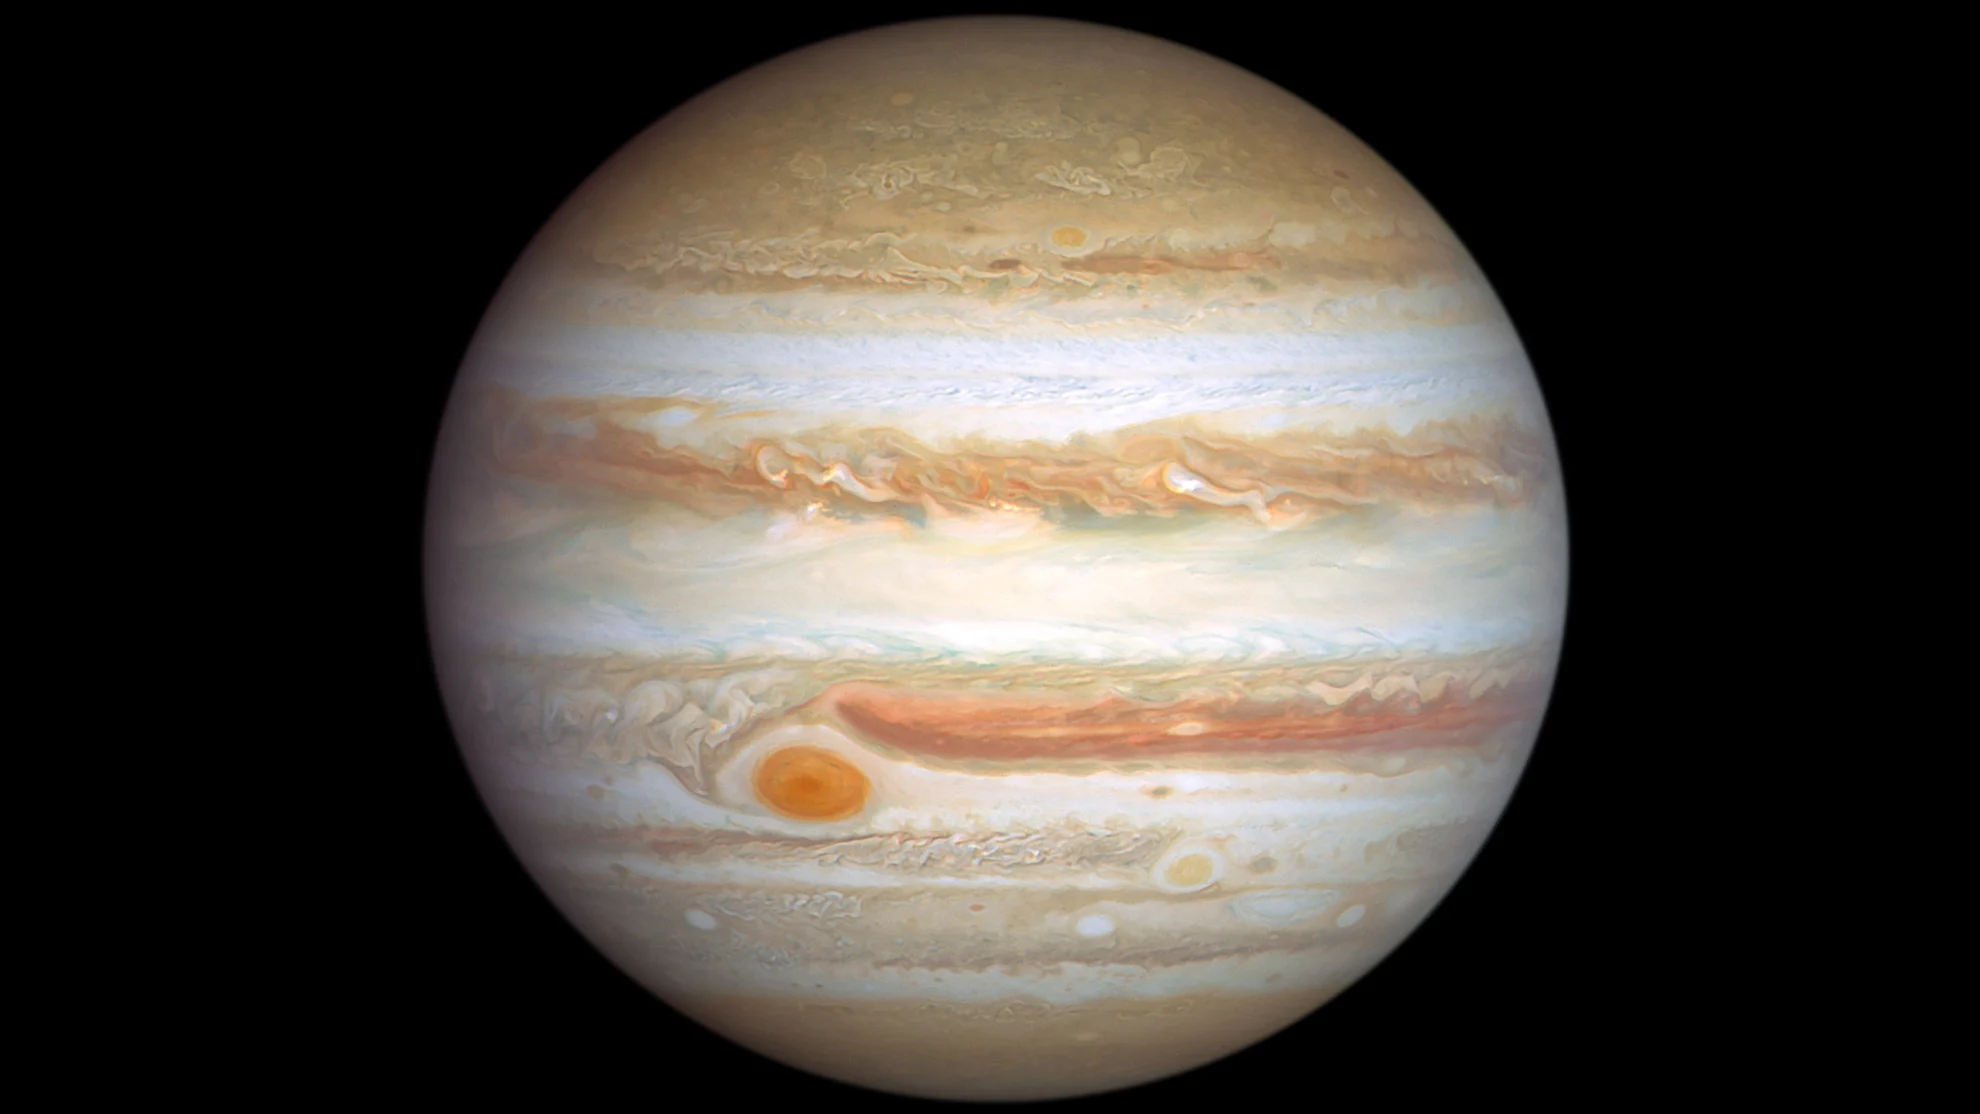 Stormy Jupiter featured in new images from Hubble Space Telescope